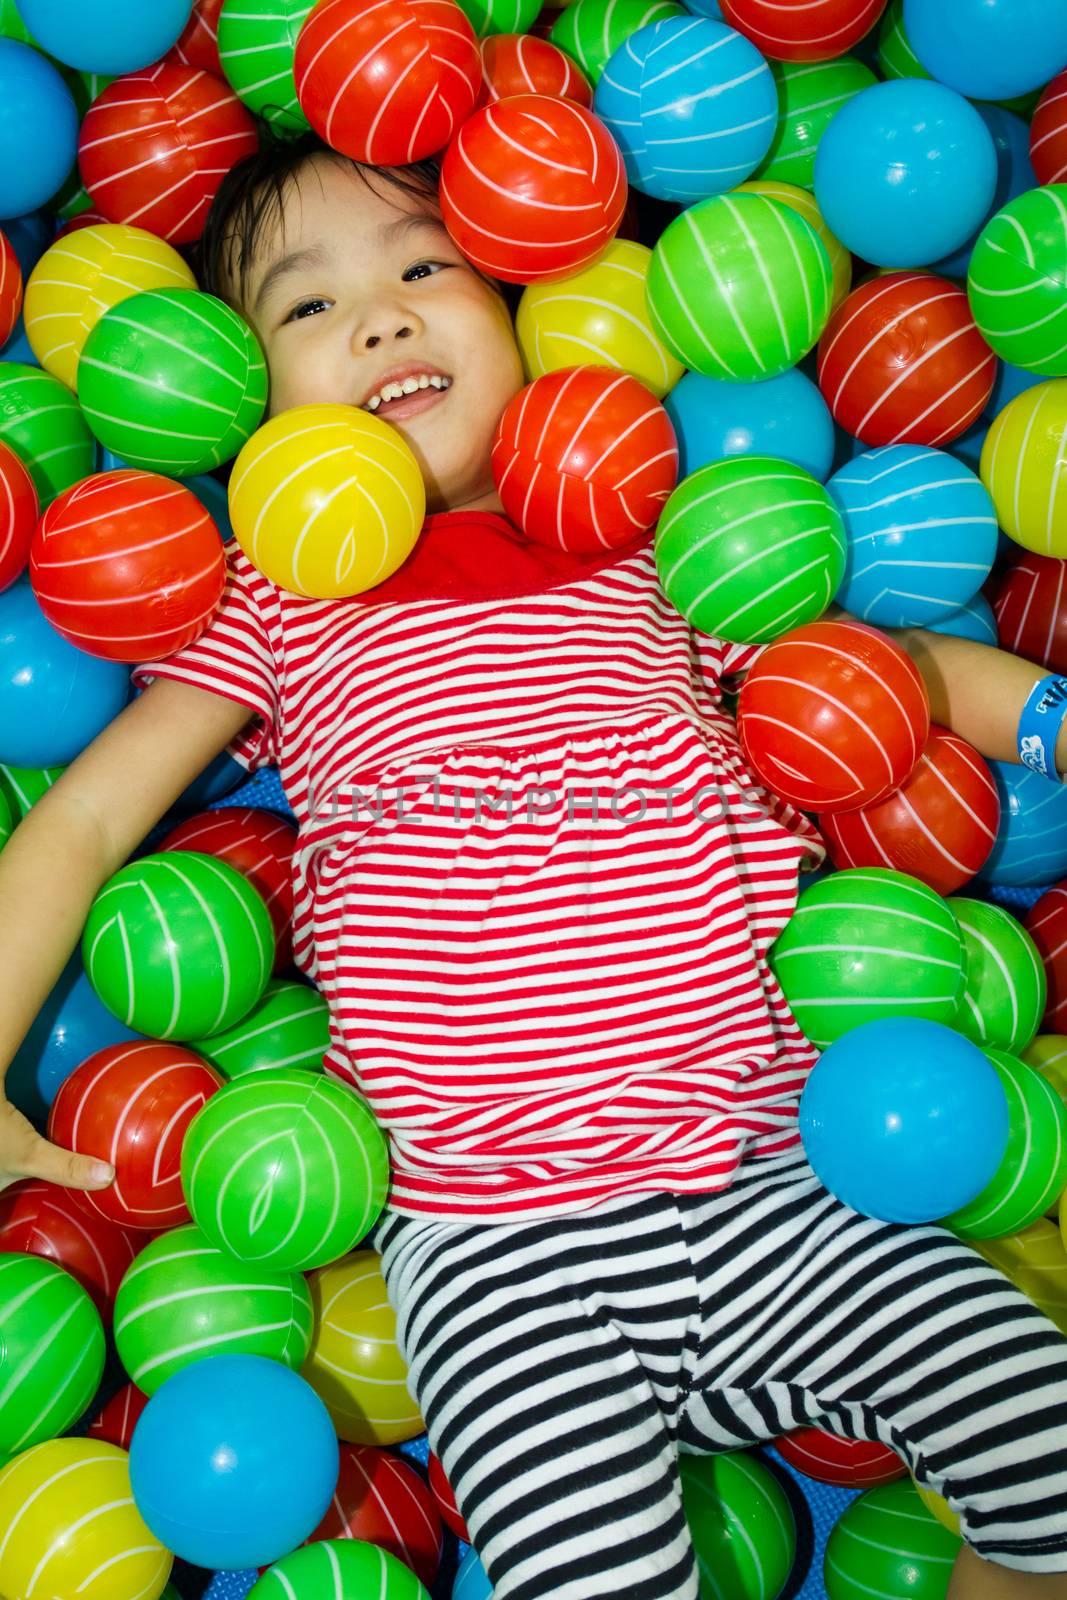 Asian Chinese girl hide in colorful ball pool at indoor playground.